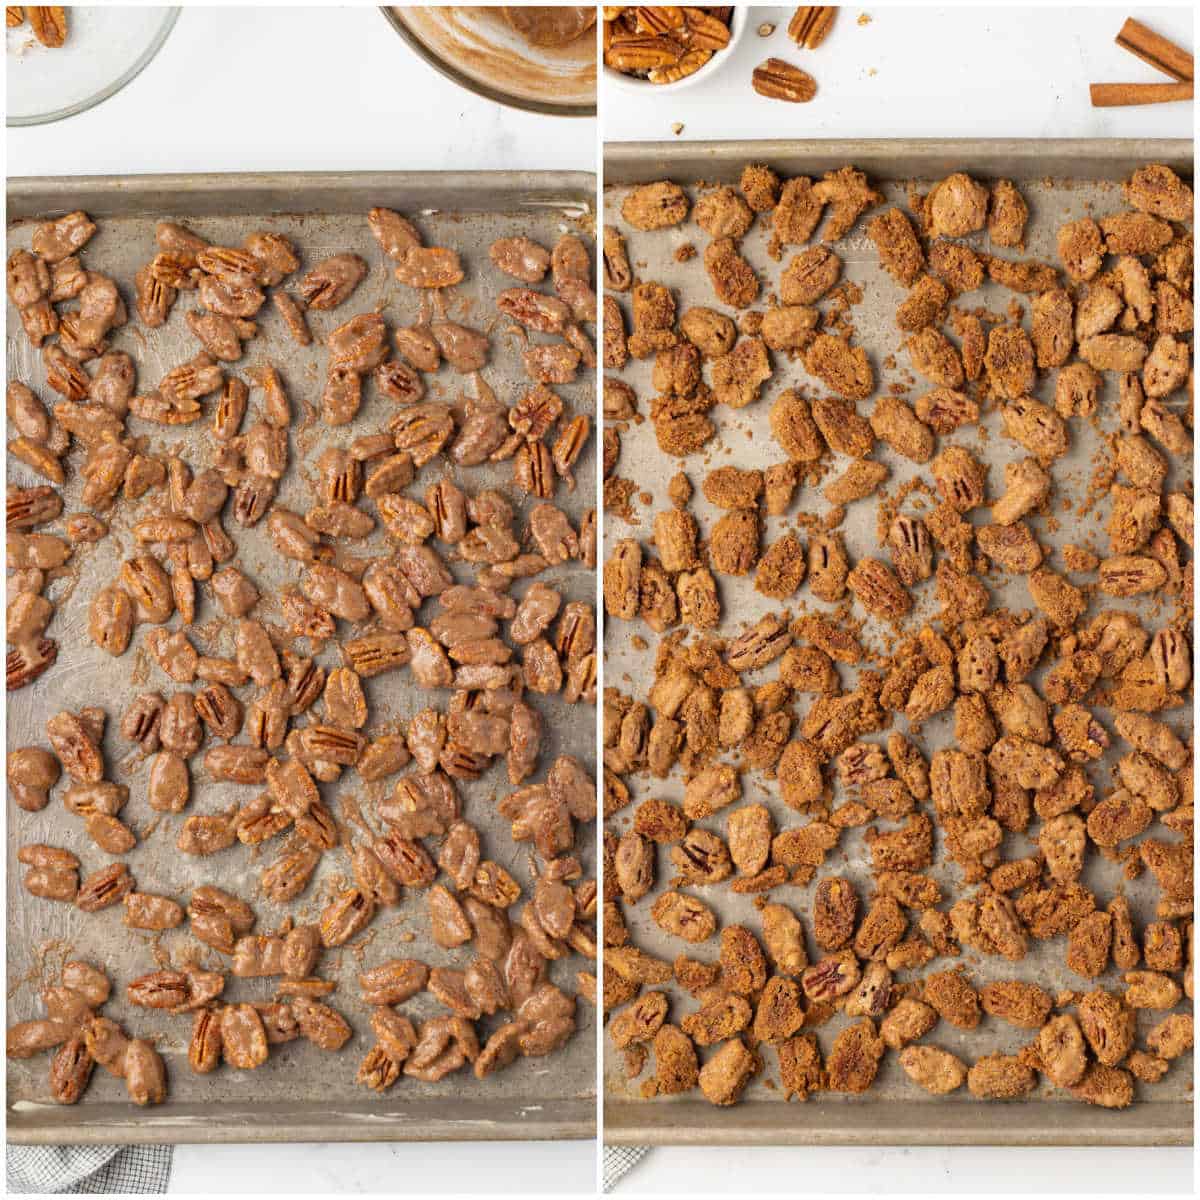 Steps to make sweet spiced pecans.